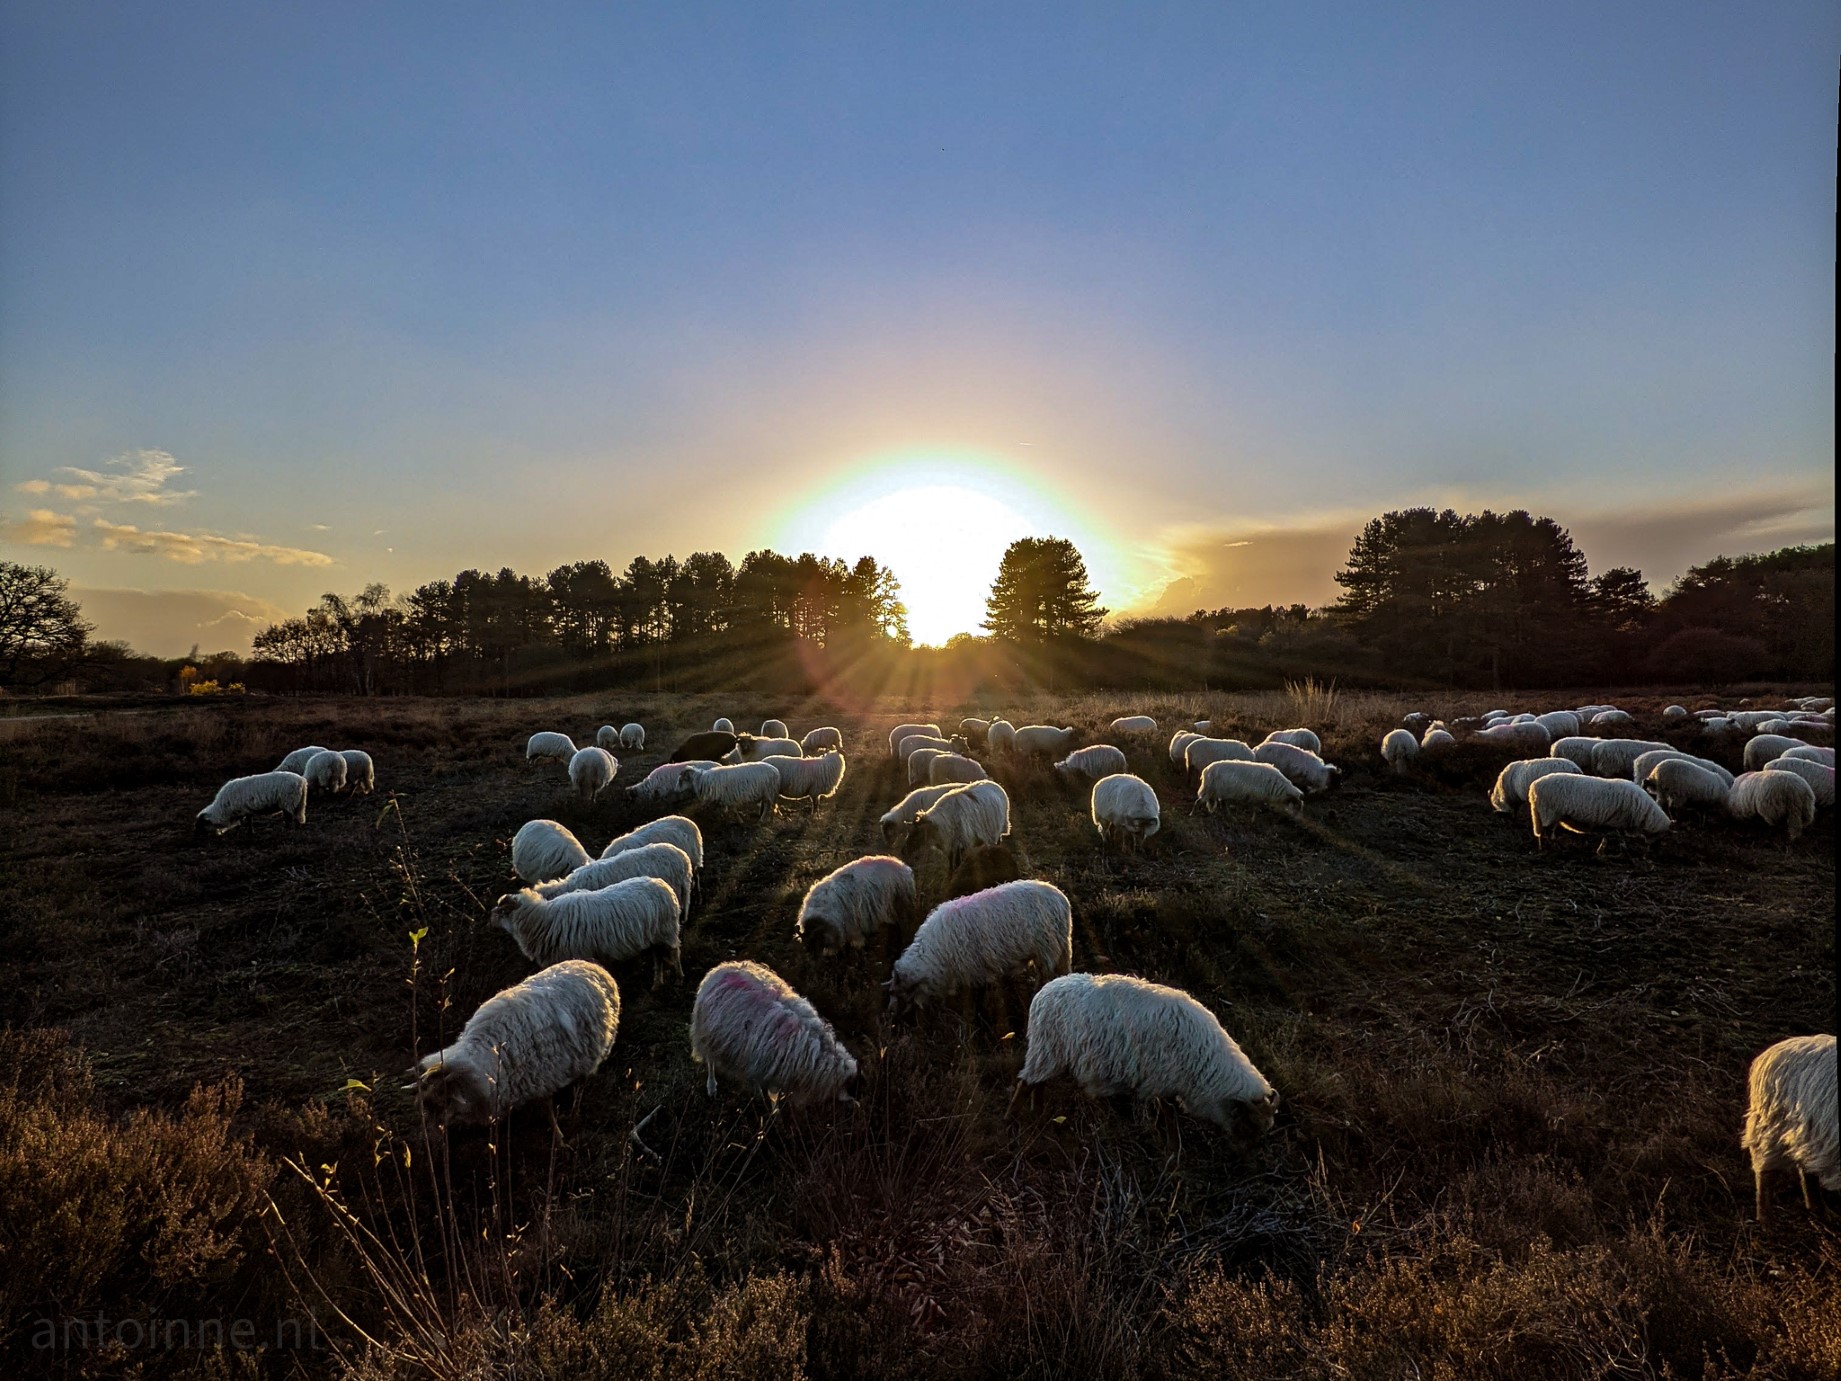 The sun is going down over the heathlands near Hilversum. You are almost blinded by the sun's rays just above the treetops. In front of you, a flock of sheep is grazing. 